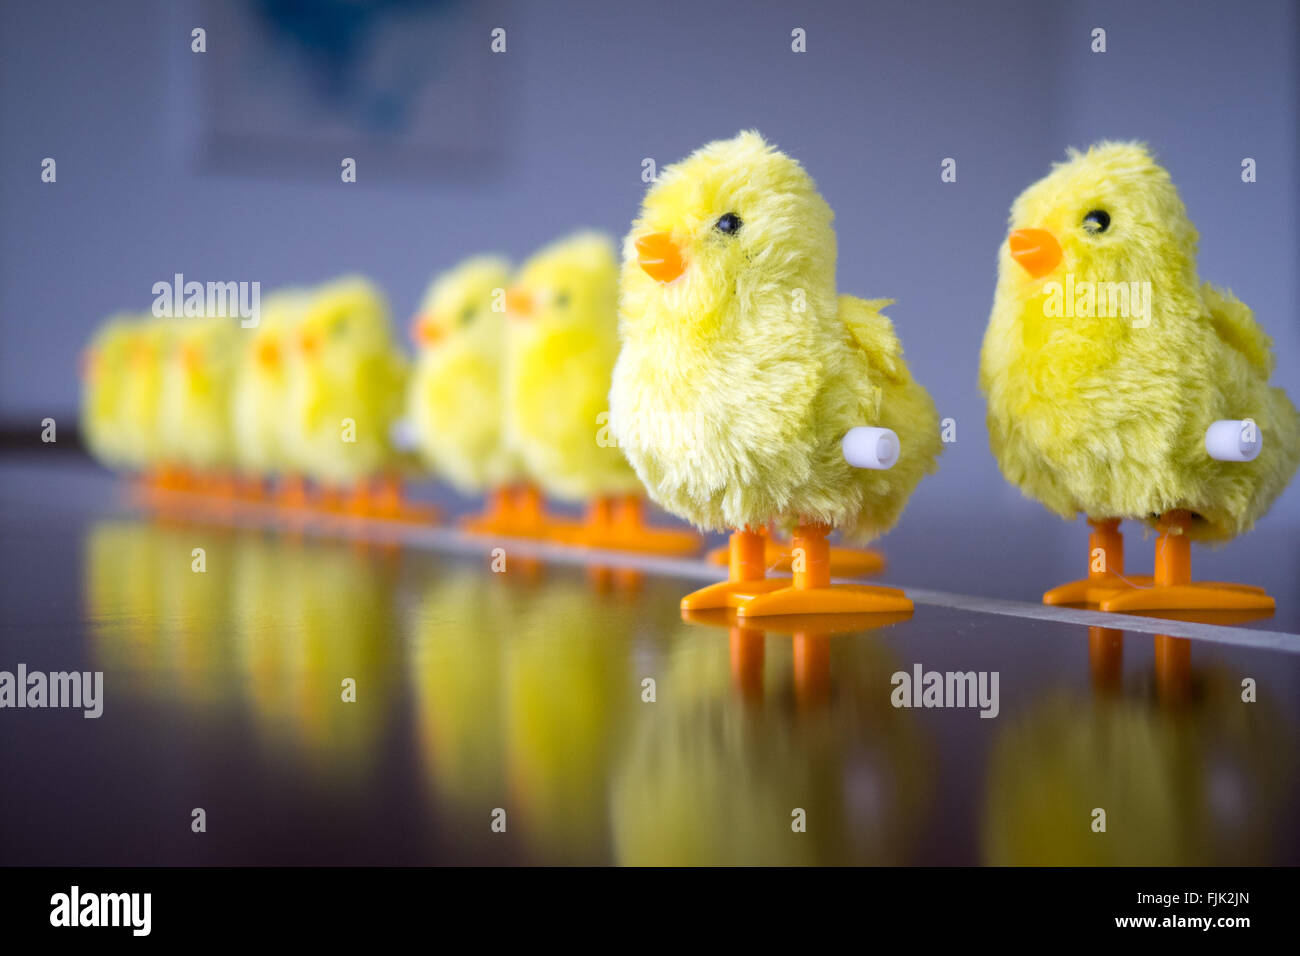 A wind-up baby chick toy. Concept: leadership, taking the first step, standing out from the crowd. Stock Photo